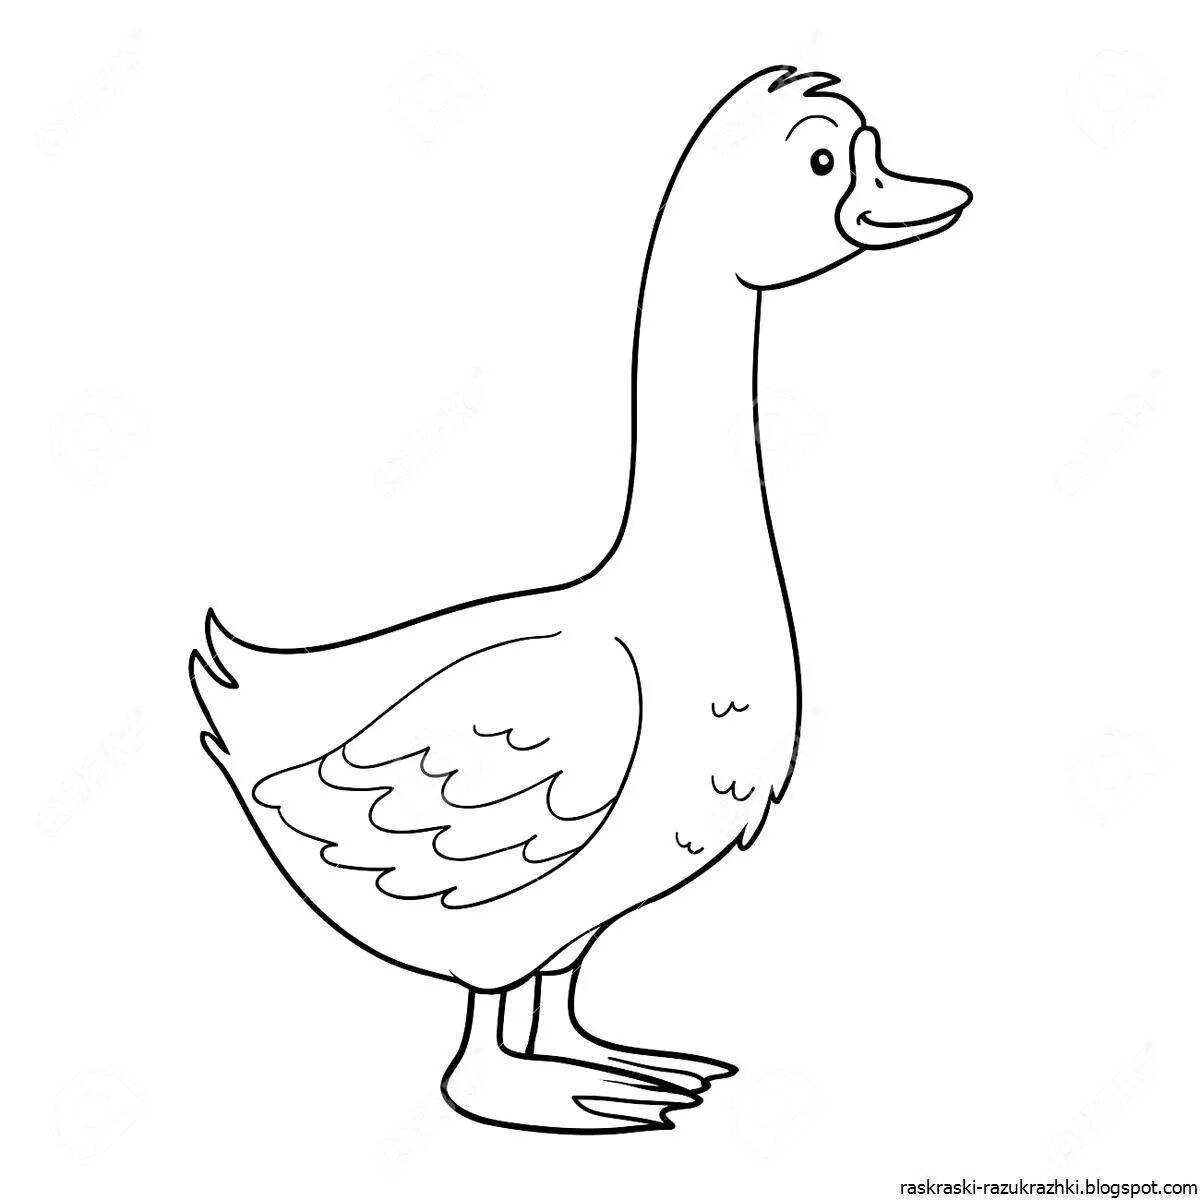 Outstanding goose coloring page for kids